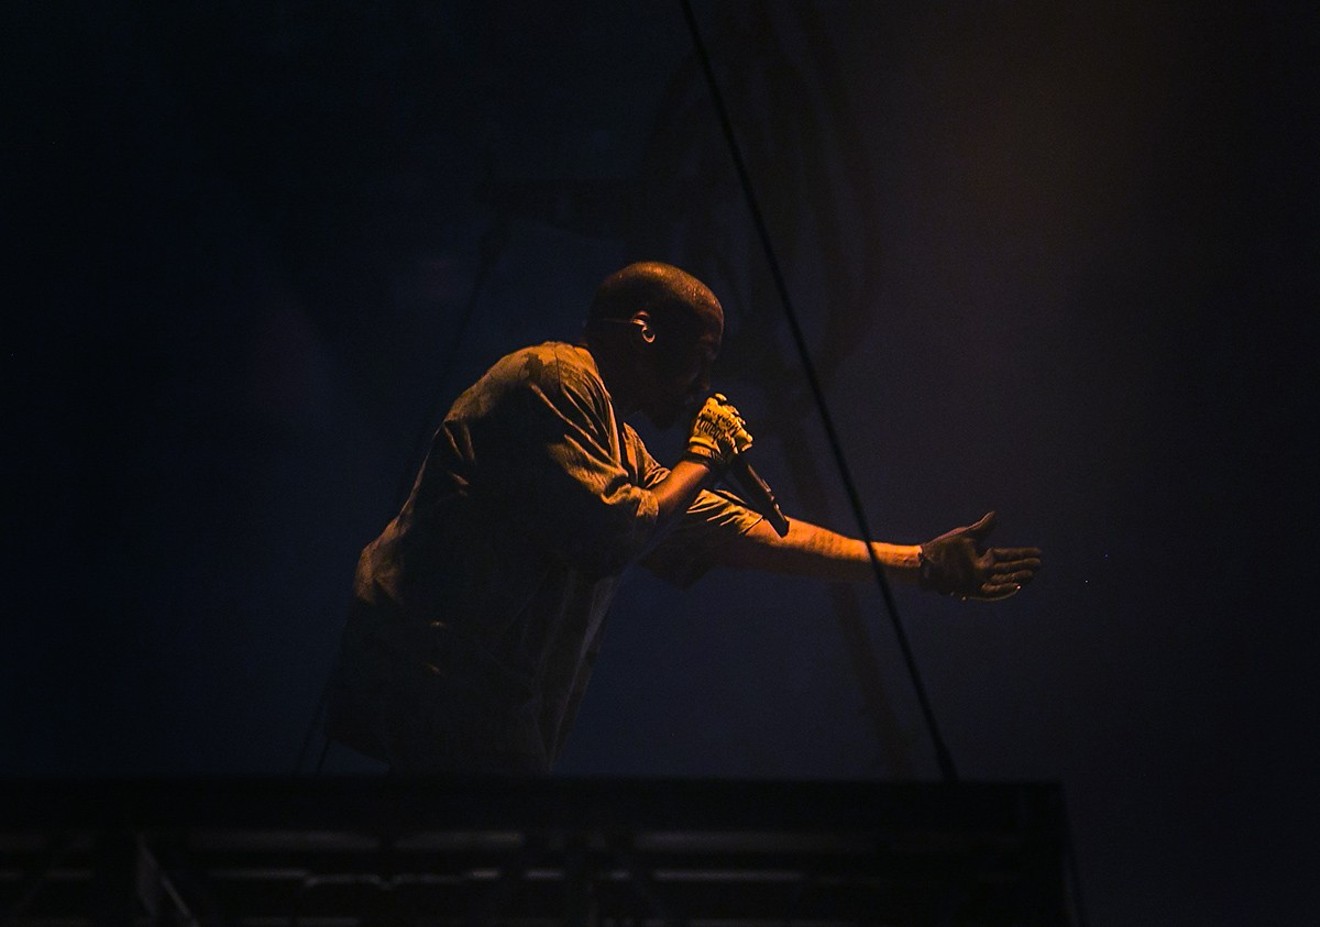 Kanye West performing at the American Airlines Arena during the 2016 Saint Pablo Tour.